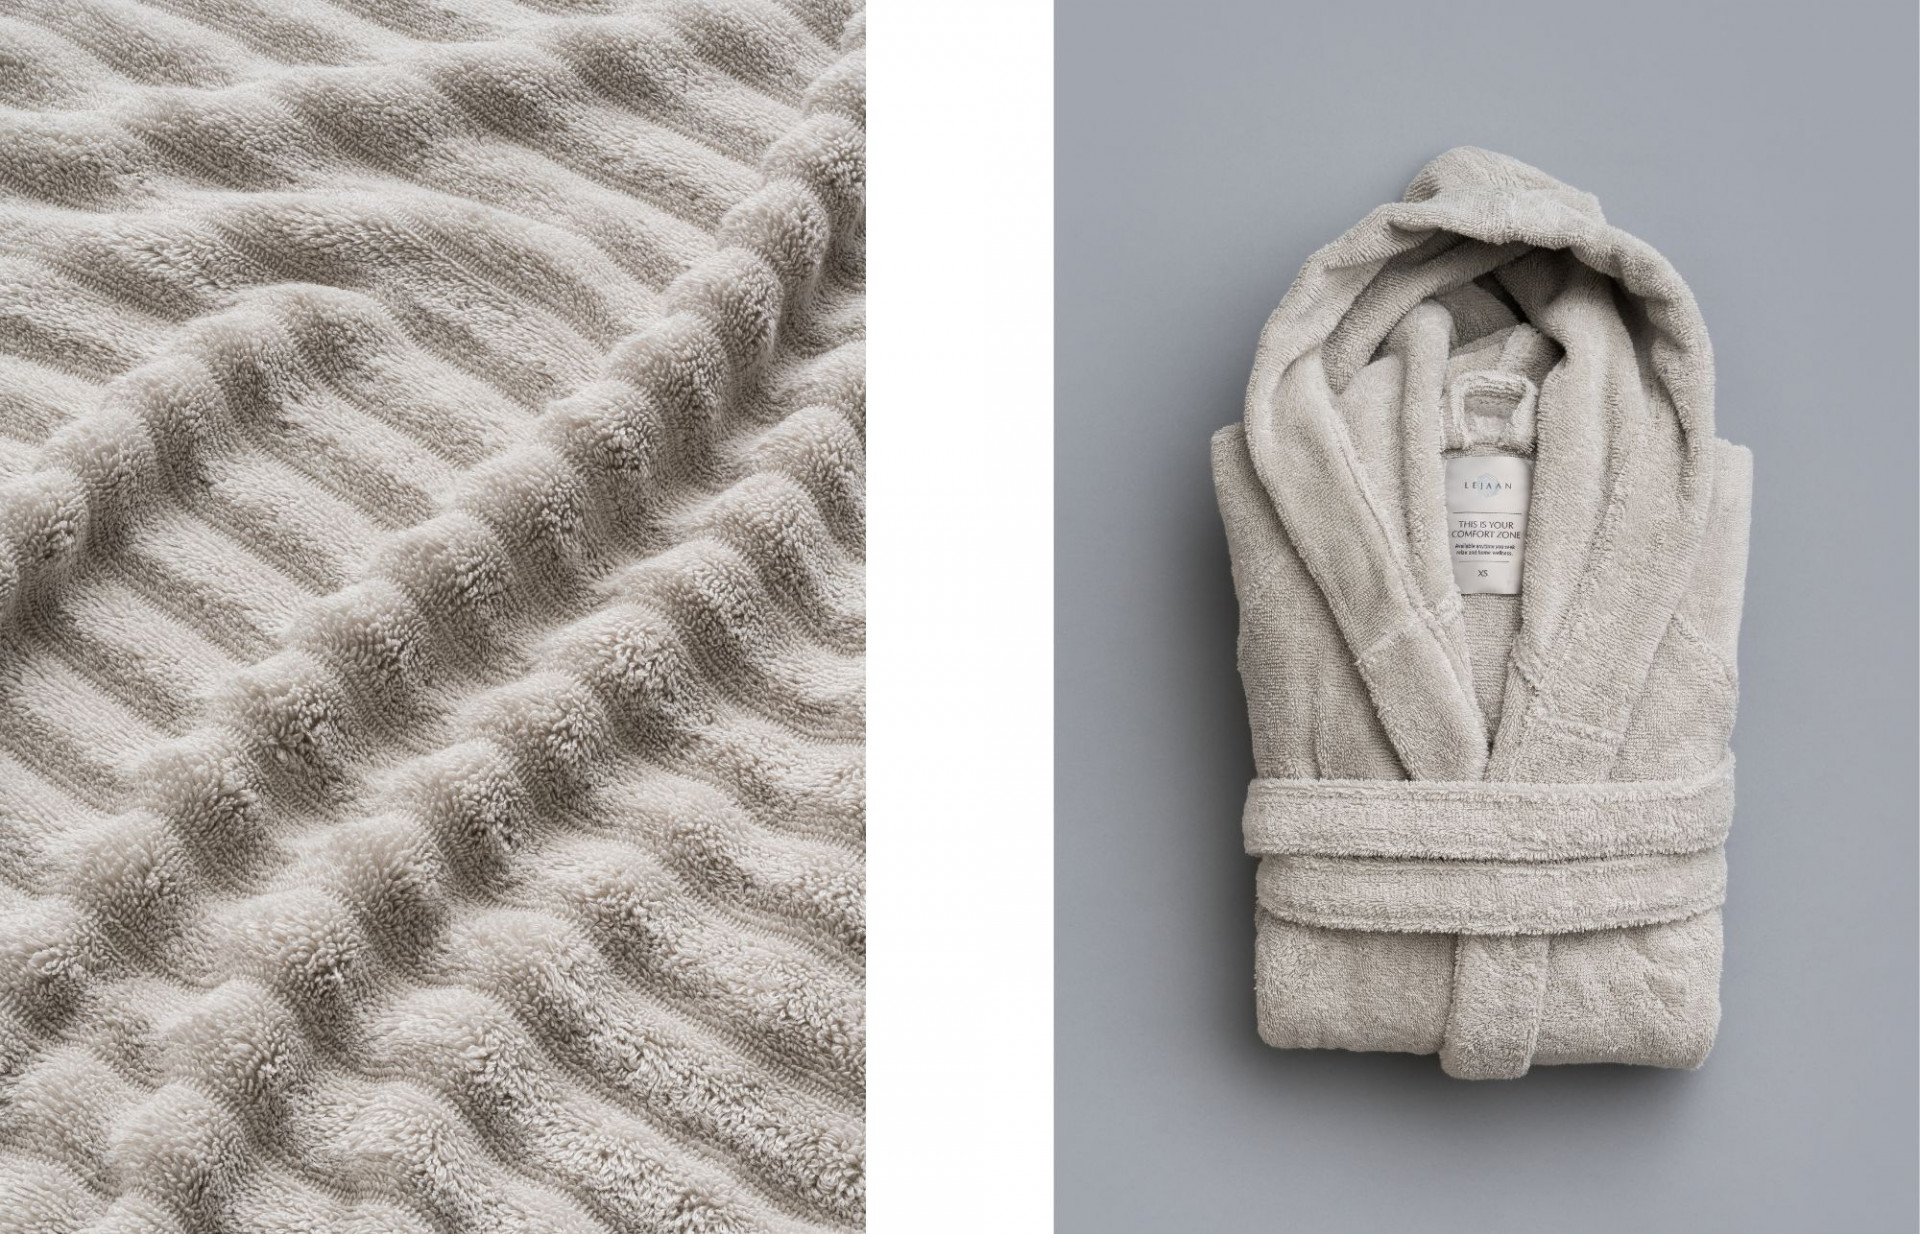 Complement our Gentle Organic towels with a matching bathrobe.